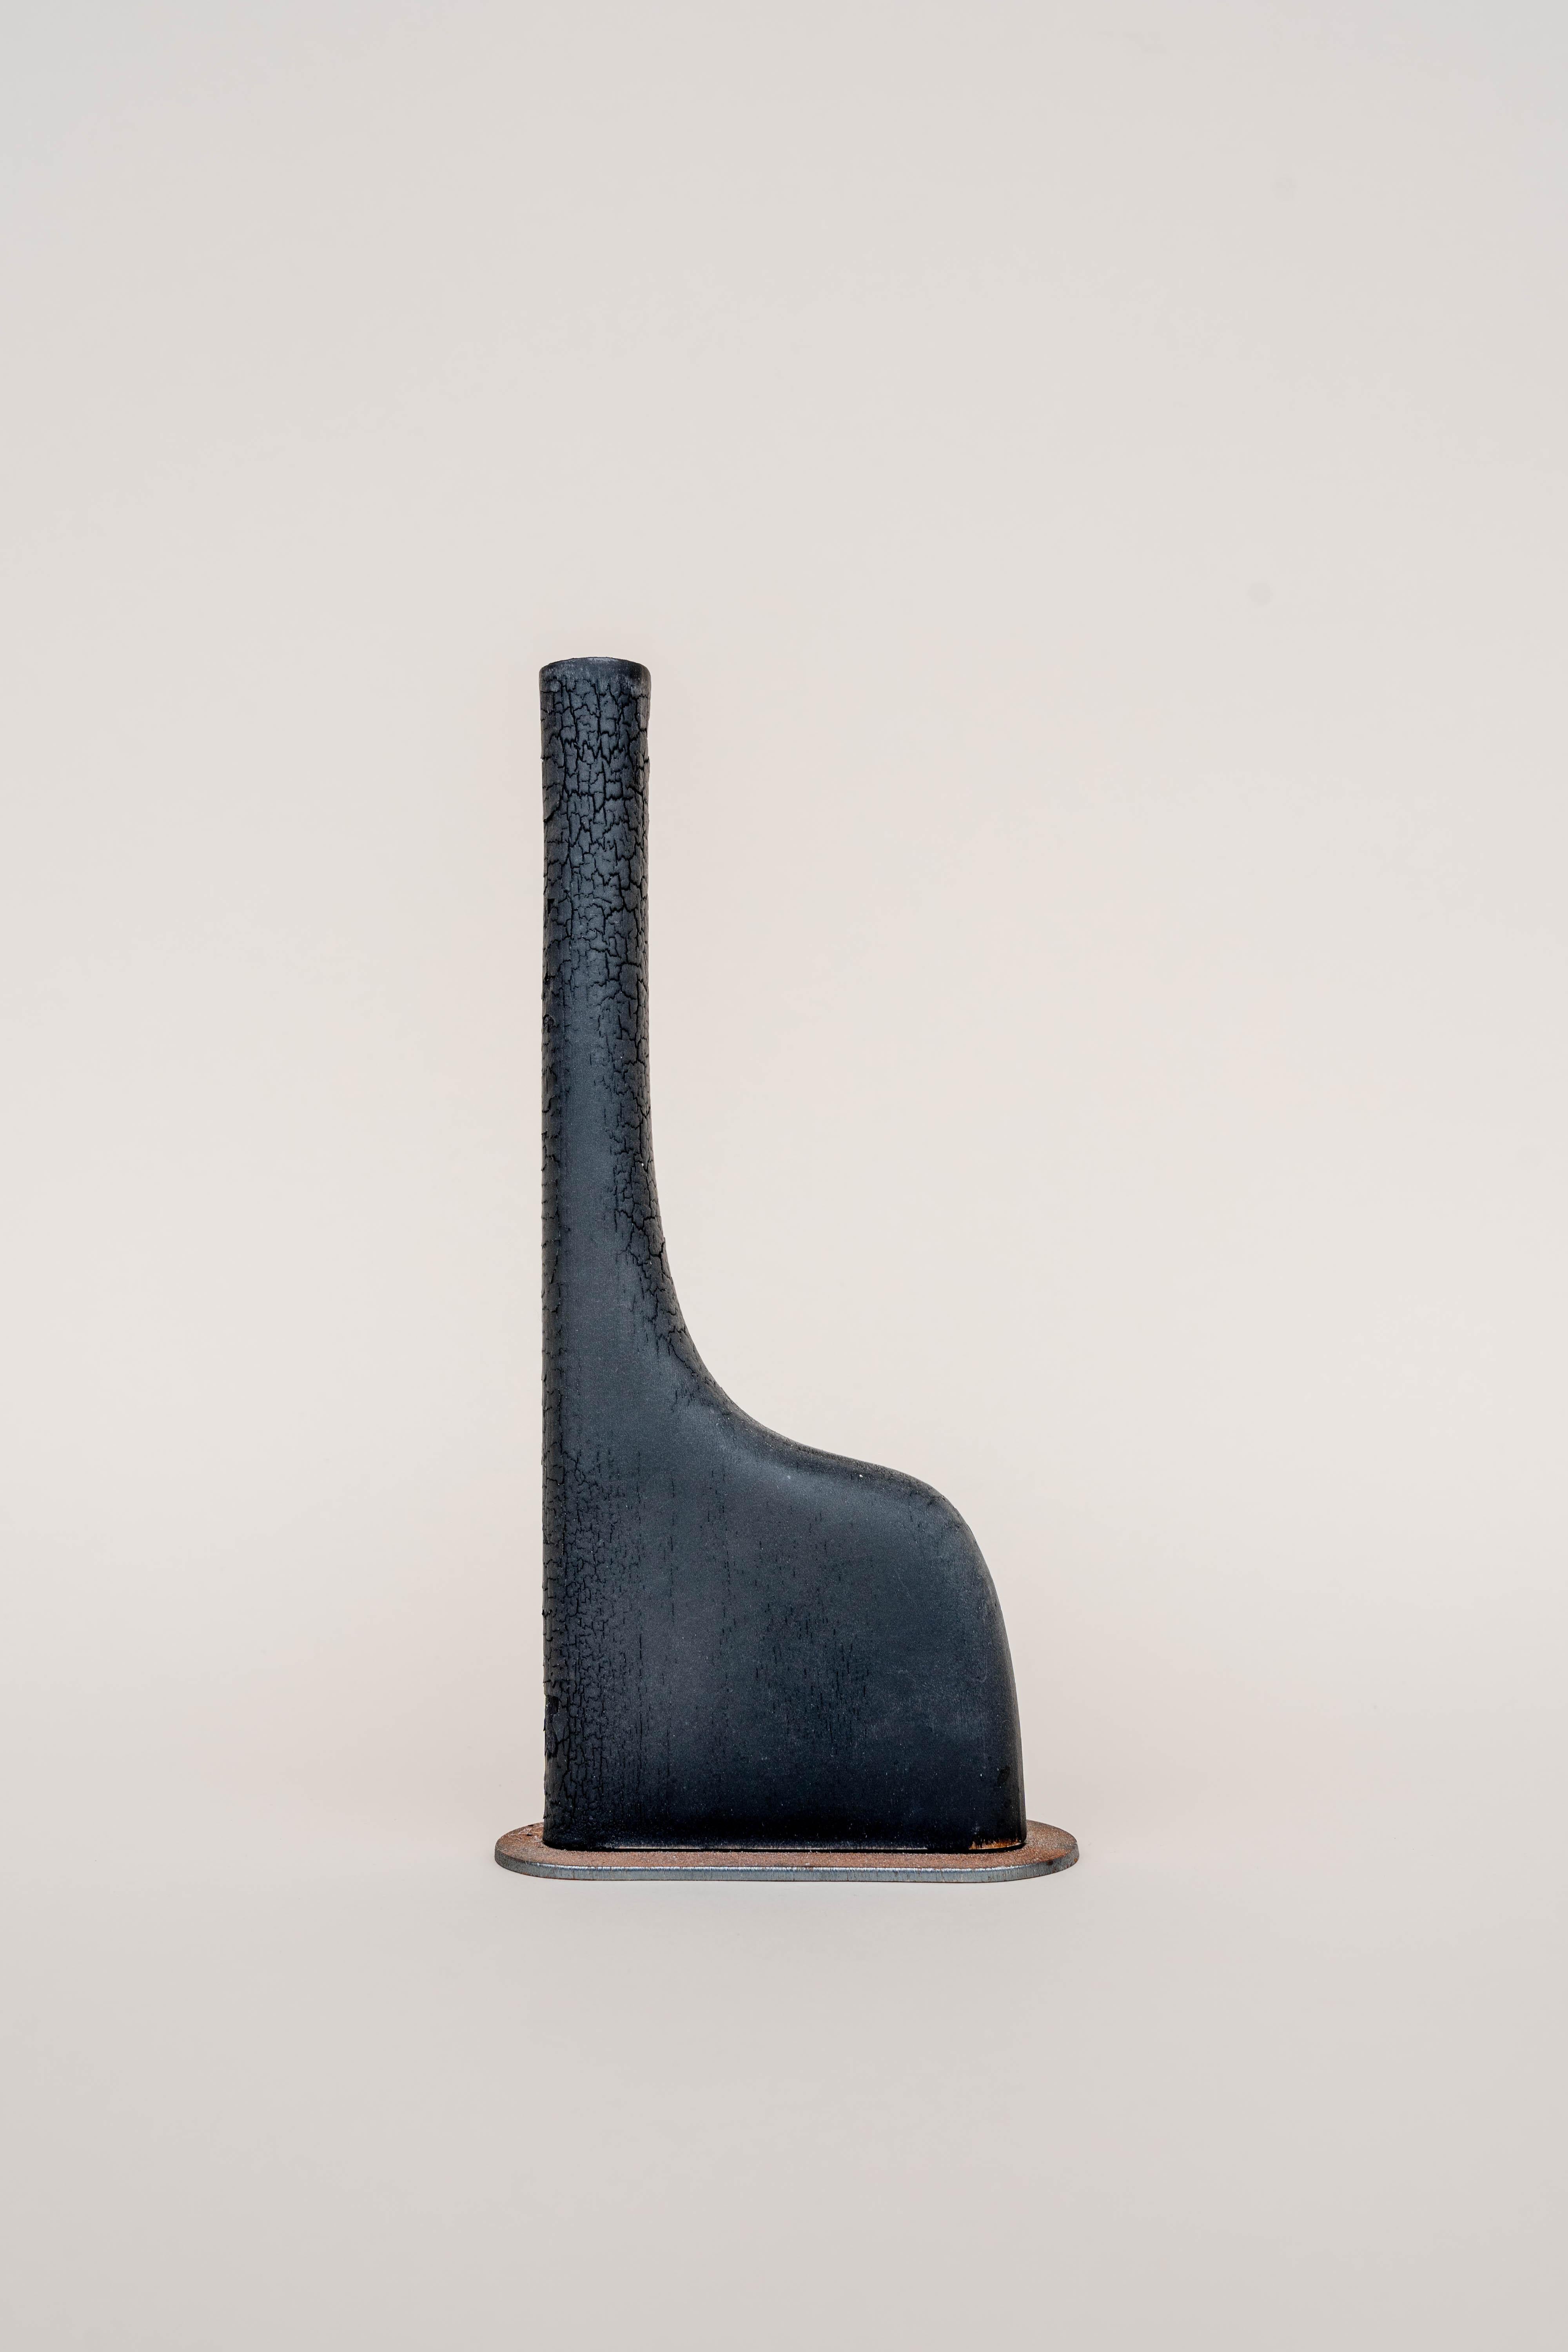 Uno vase by Daniel Elkayam
One of a kind
Dimensions: D 2.5 x W 10 x H 27 cm 
Materials: burnt poplar wood


Jerusalem-born Art-designer and Photographer based in Tel-Aviv. Operating in the field of sustainable home decor and specializing in